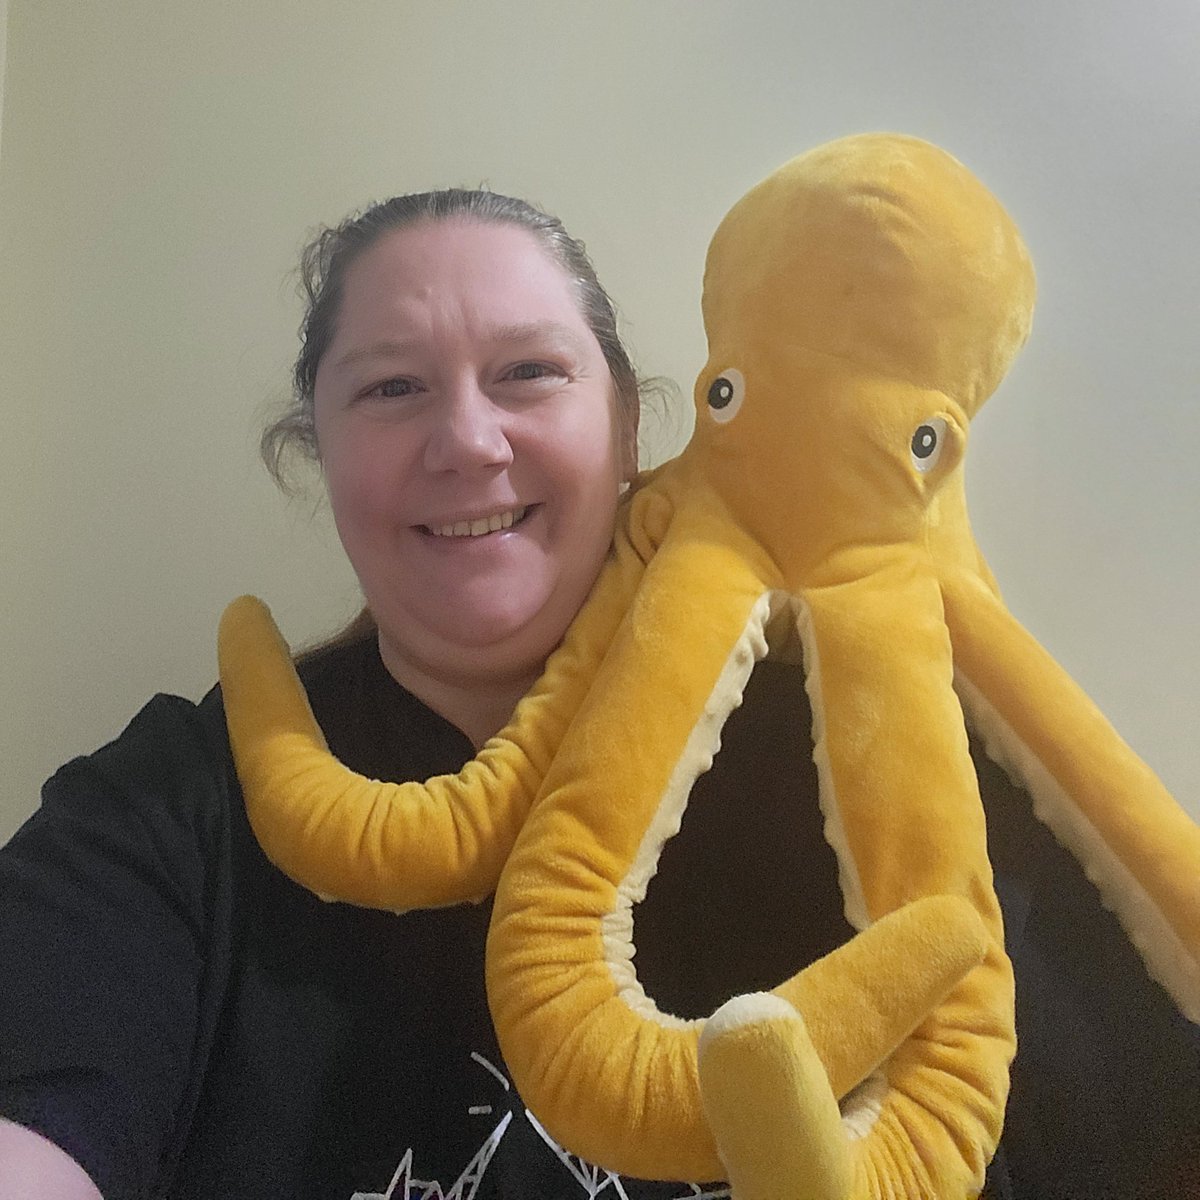 He's not purple. So, not OctoPi. This is OctoPi's brother, Mathopad. Question is: does he make the journey to Denver with me? Or do I find a more manageable actual OctoPi?

#EduGuardians #EduSuperheros #ISTELive #ISTEComnunityLeaders #TeamOctopus